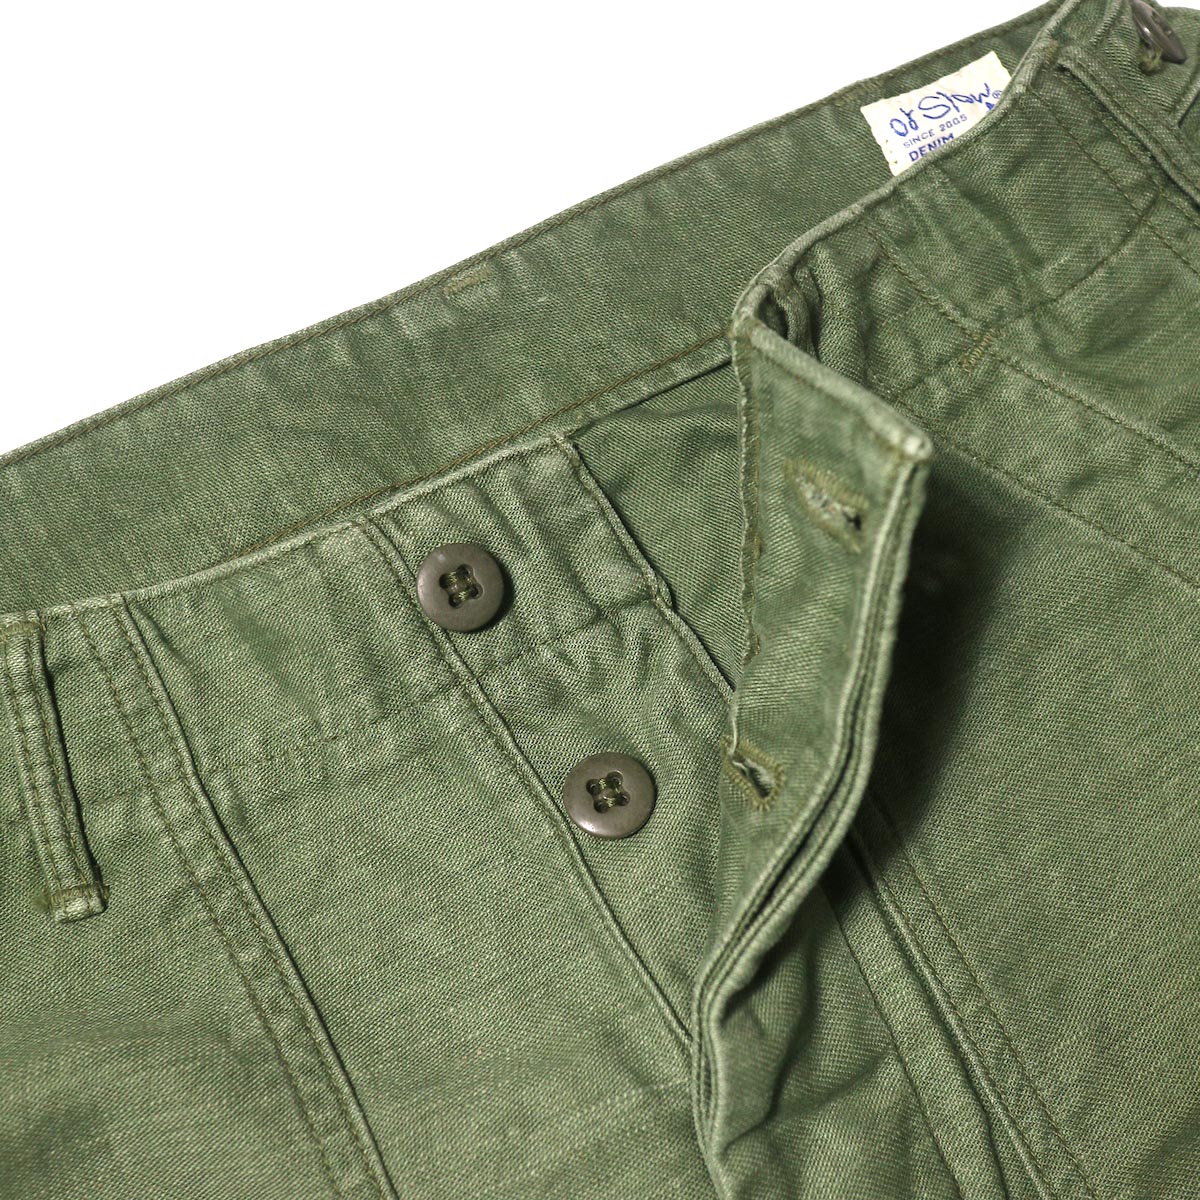 orSlow / US ARMY FATIGUE PANTS (Used Green)ボタンフライ